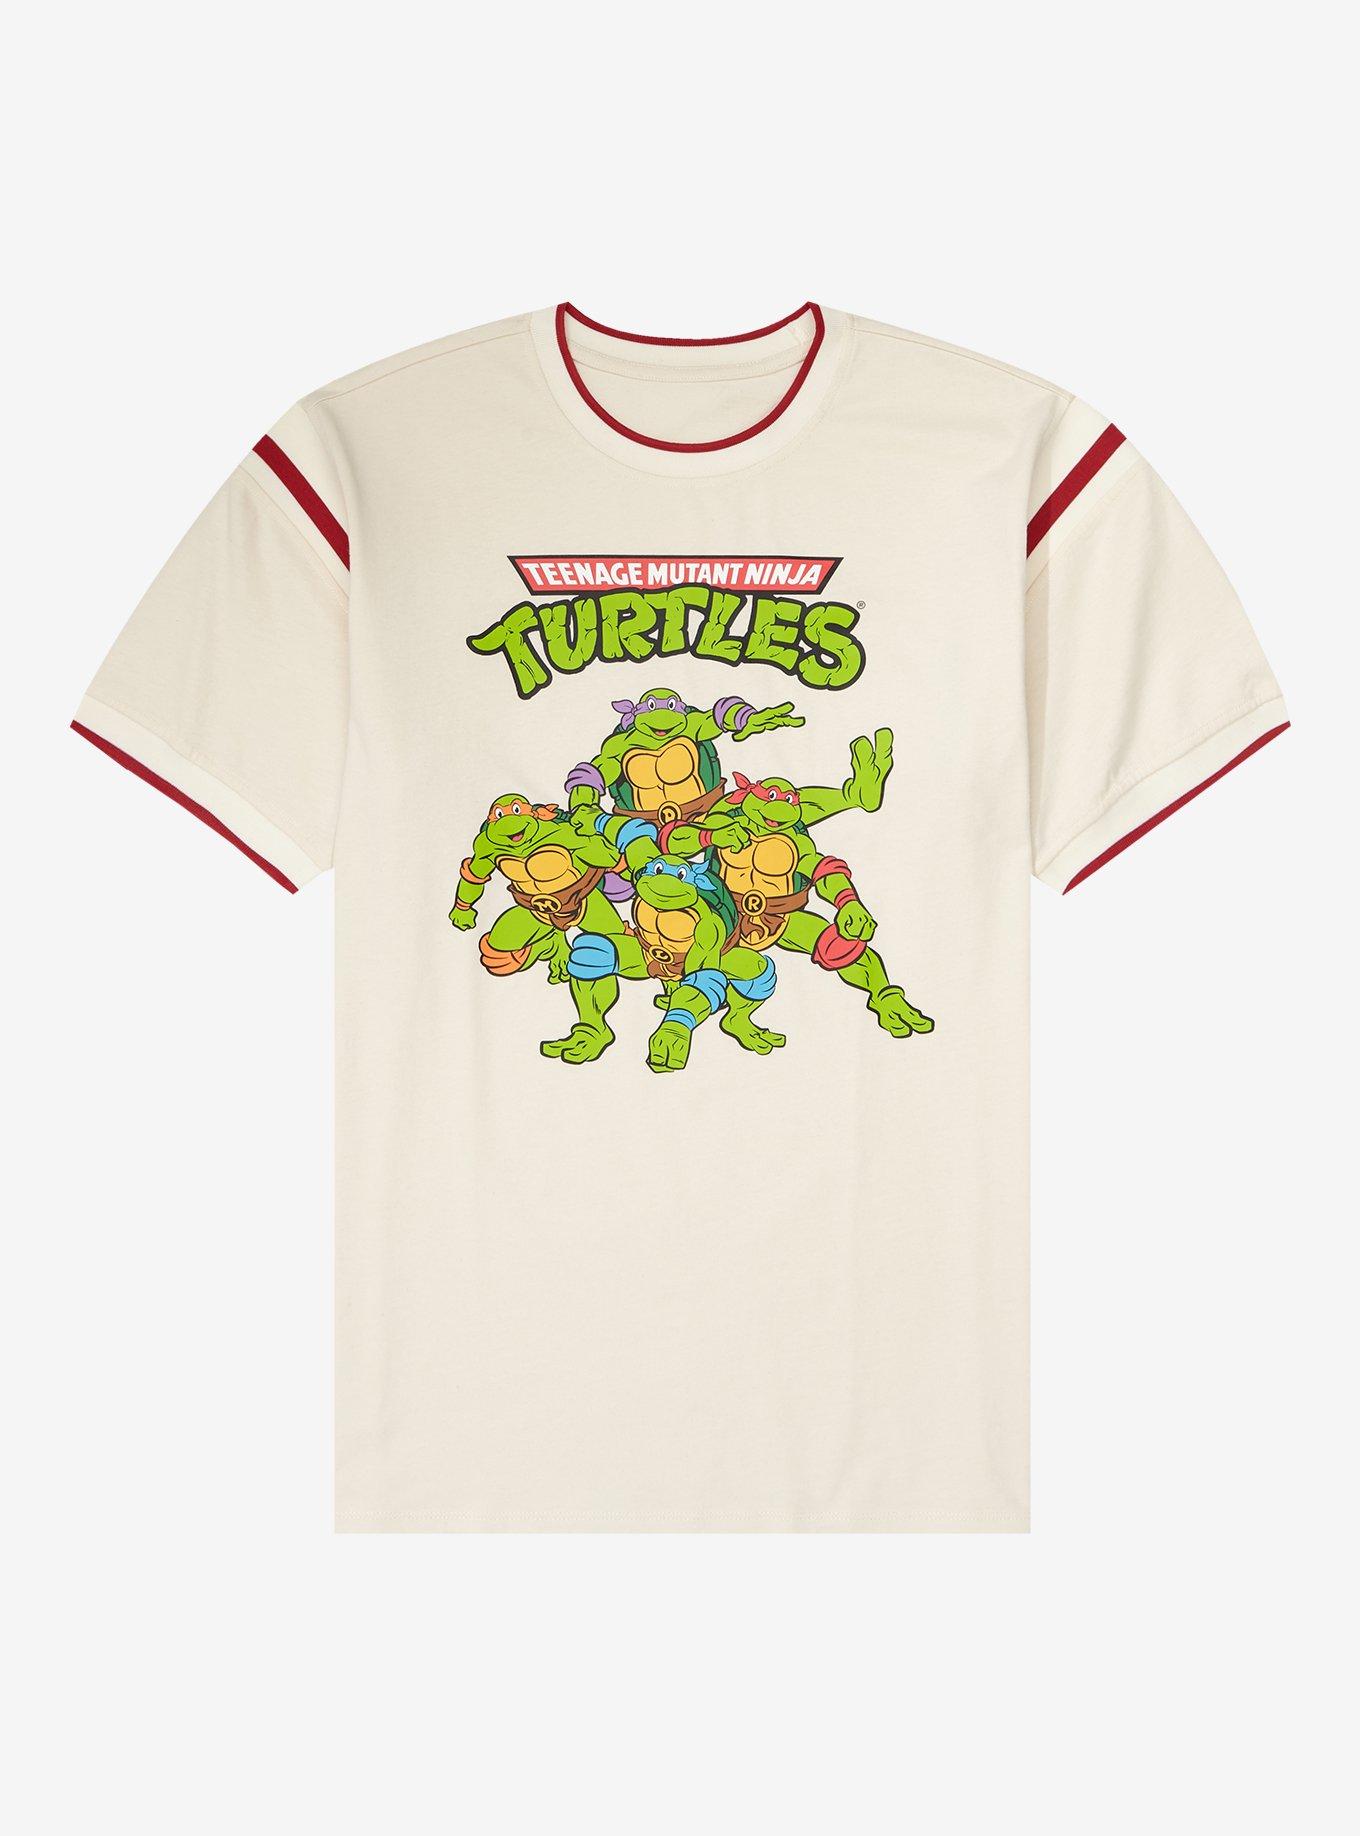 Teenage Mutant Ninja Turtles - Turtle Squad - Toddler And Youth Short  Sleeve Graphic T-Shirt